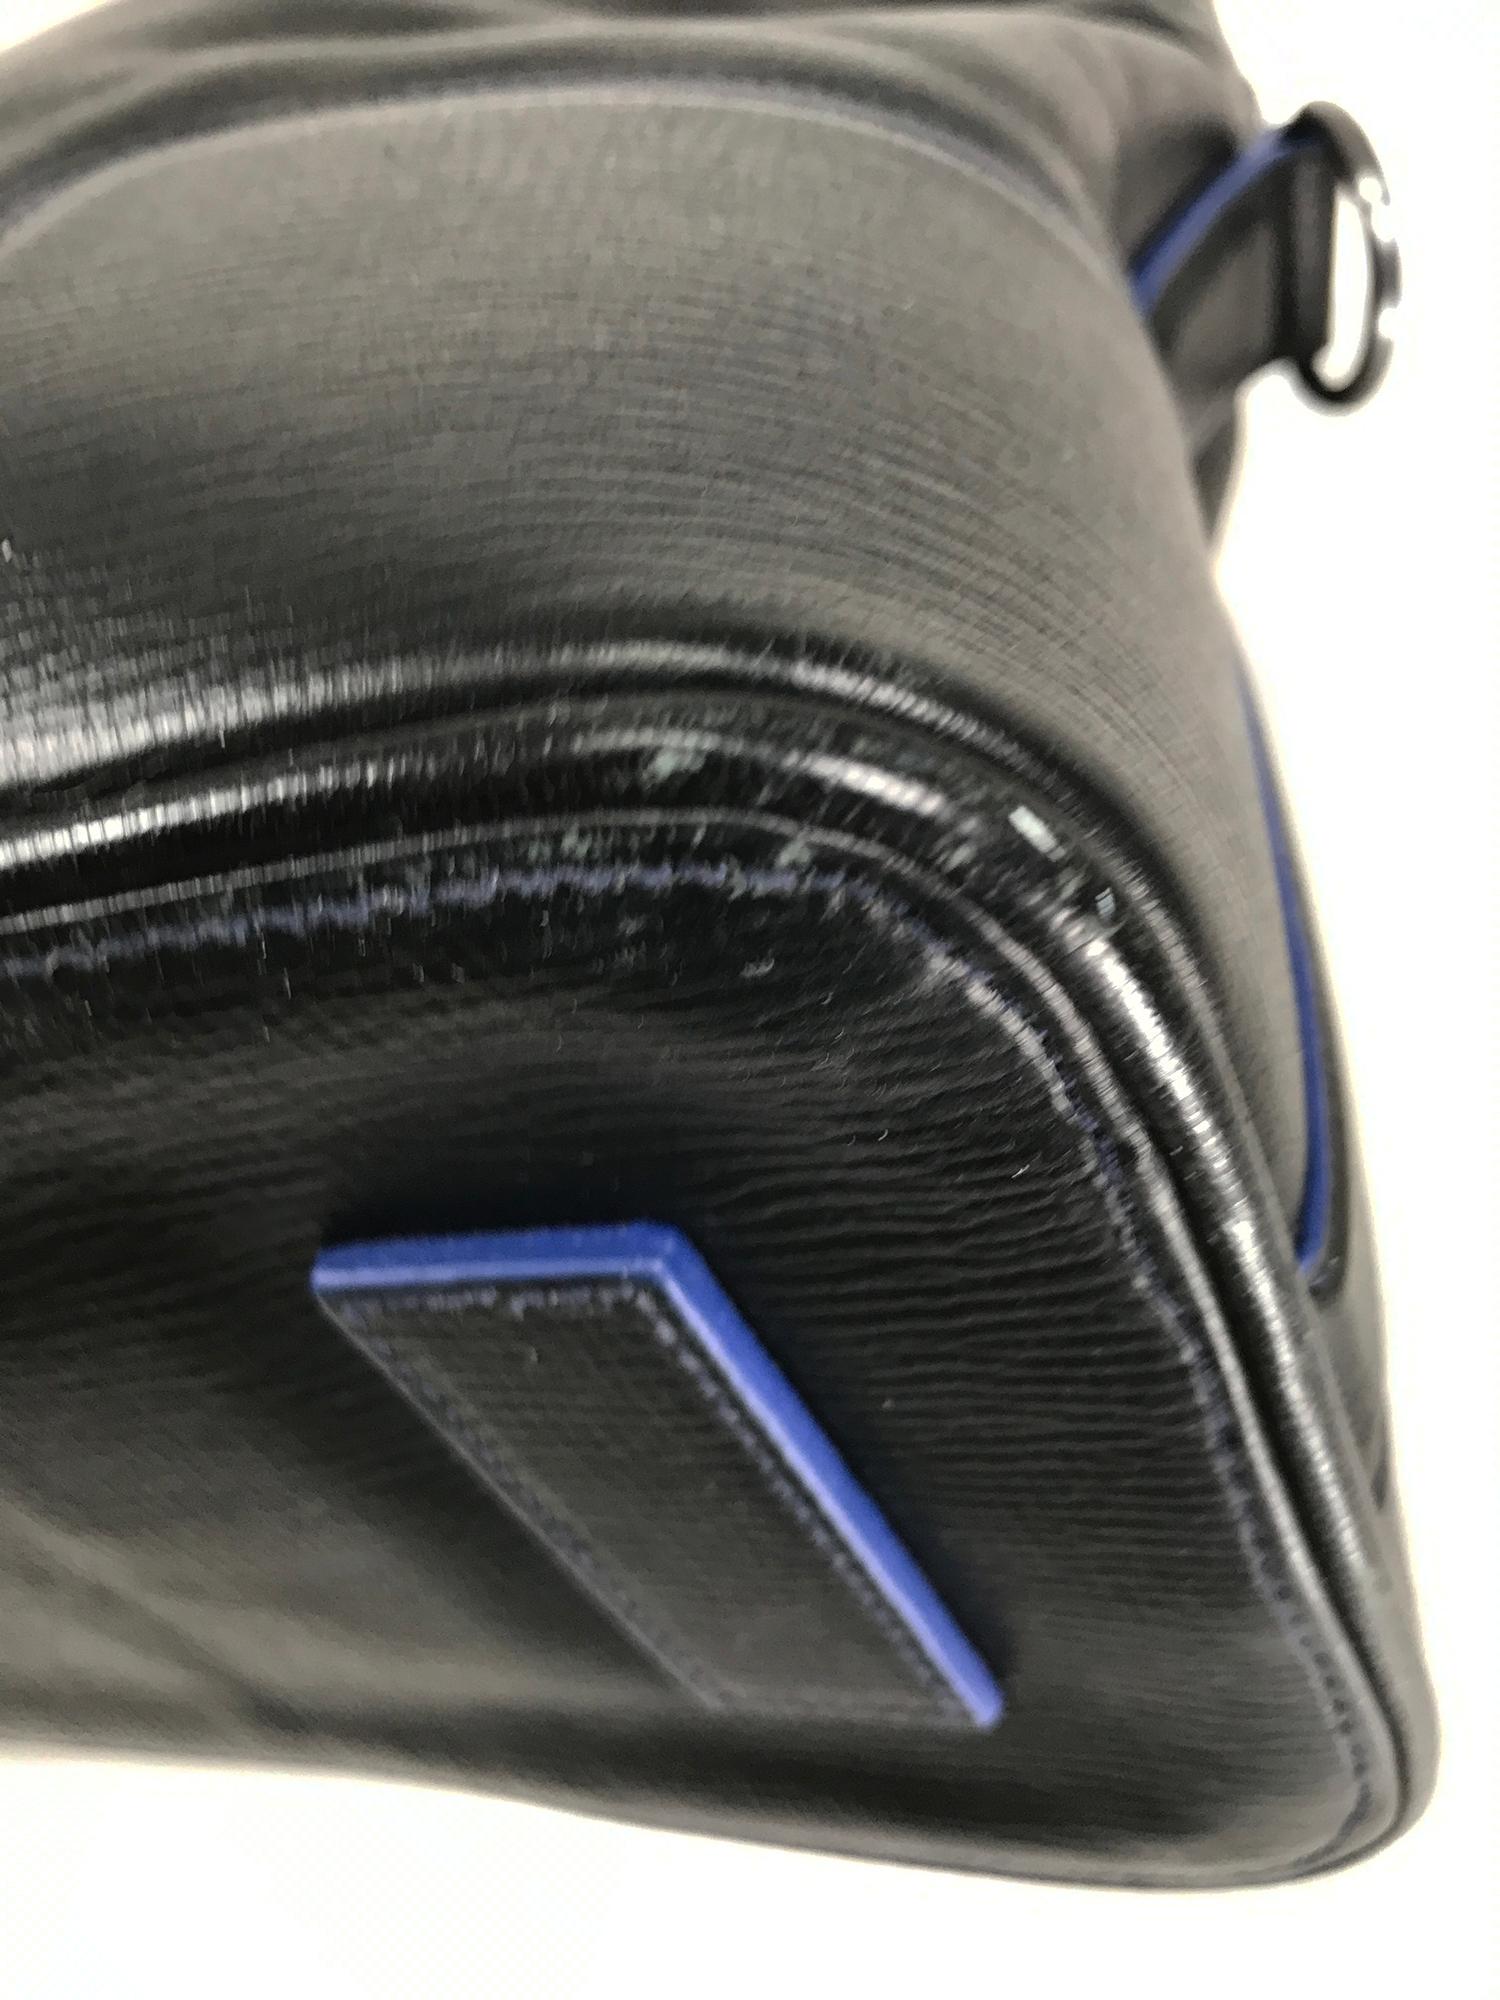 Hugo Boss Black & Blue Leather Business Bag Carry On Shoulder Bag In Good Condition In West Palm Beach, FL